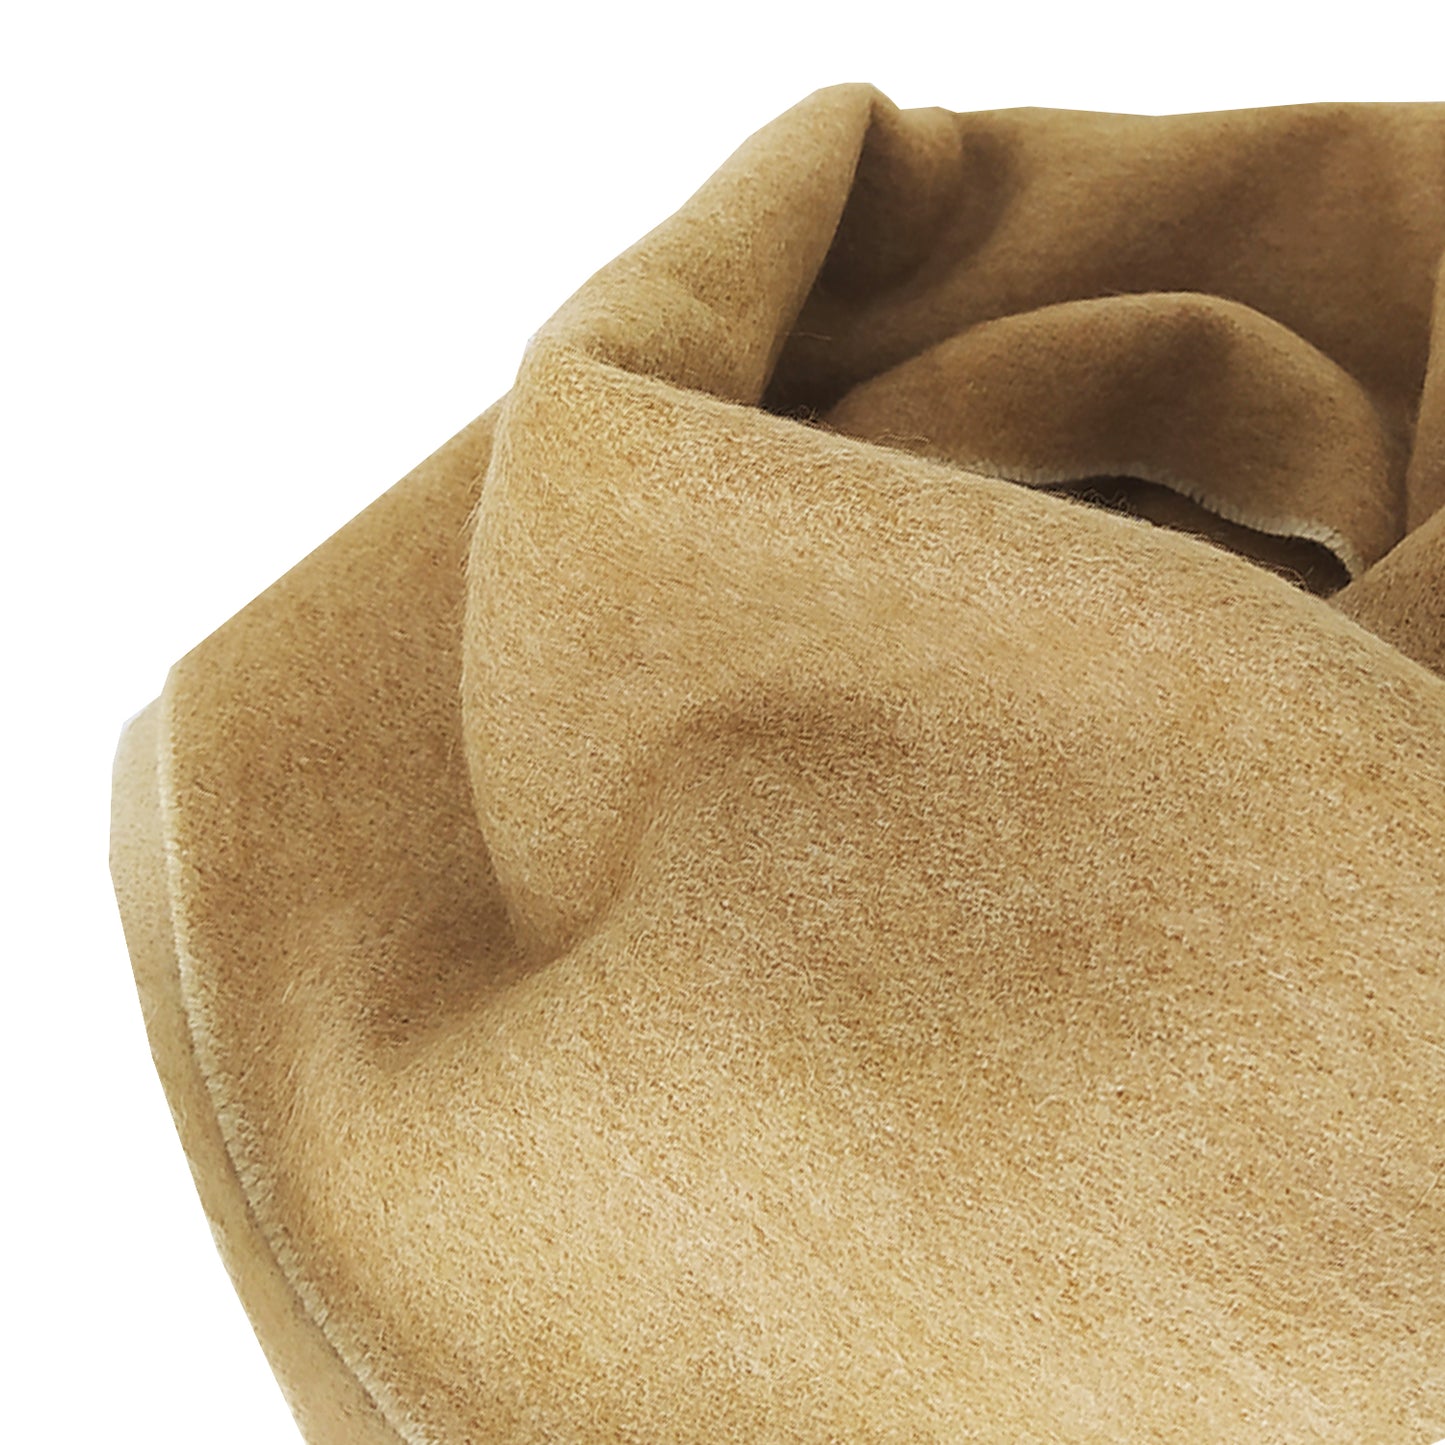 Wool Scarf from Camel hair 05010091